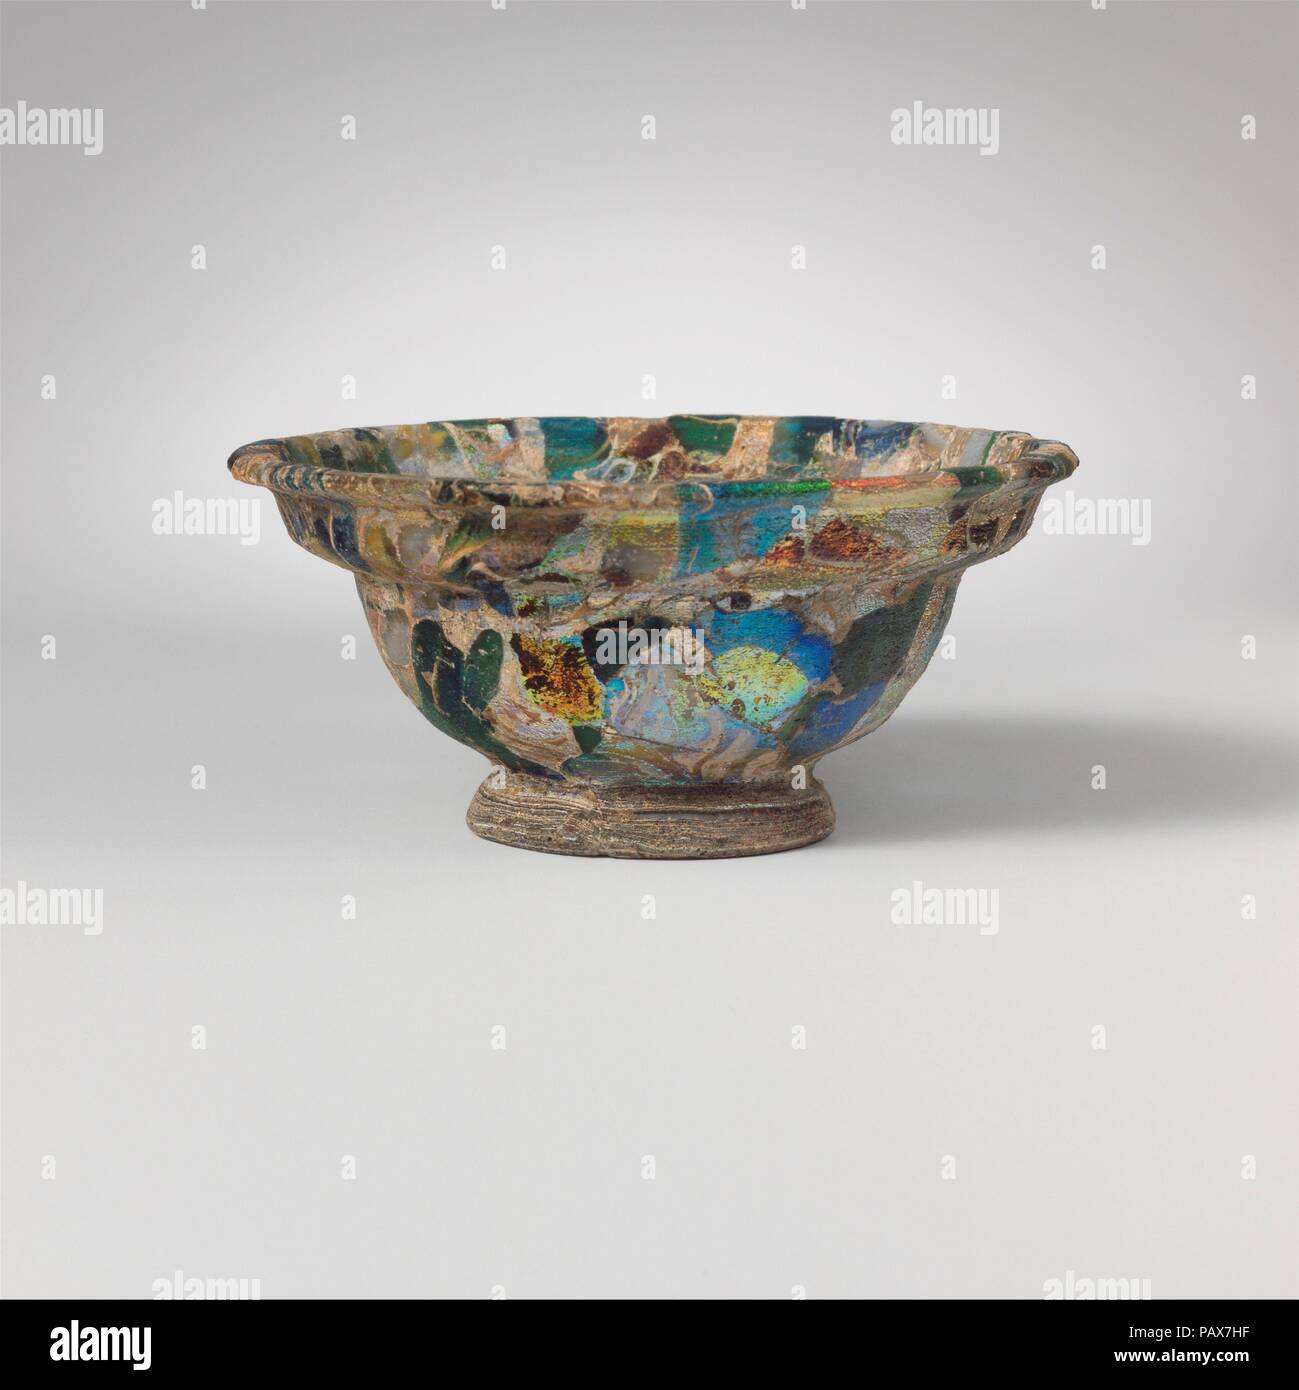 Glass mosaic bowl. Culture: Roman, probably Italian. Dimensions: H.: 1 5/8 in. (4.1 cm)  Diam.: 3 9/16 in. (9 cm). Date: late 1st century B.C.-early 1st century A.D..  Colorless, translucent purple, cobalt blue, turquoise blue, green, honey yellow, and semi-opaque white on body; color(s) of base ring uncertain.  Horizontal everted rim with rounded edge; carinated side, with two convex curves, the upper being narrower and slightly angular, the lower being deeper and more rounded; convex bottom within applied outsplayed base ring with rounded edge.  Composite mosaic pattern formed from polygonal Stock Photo